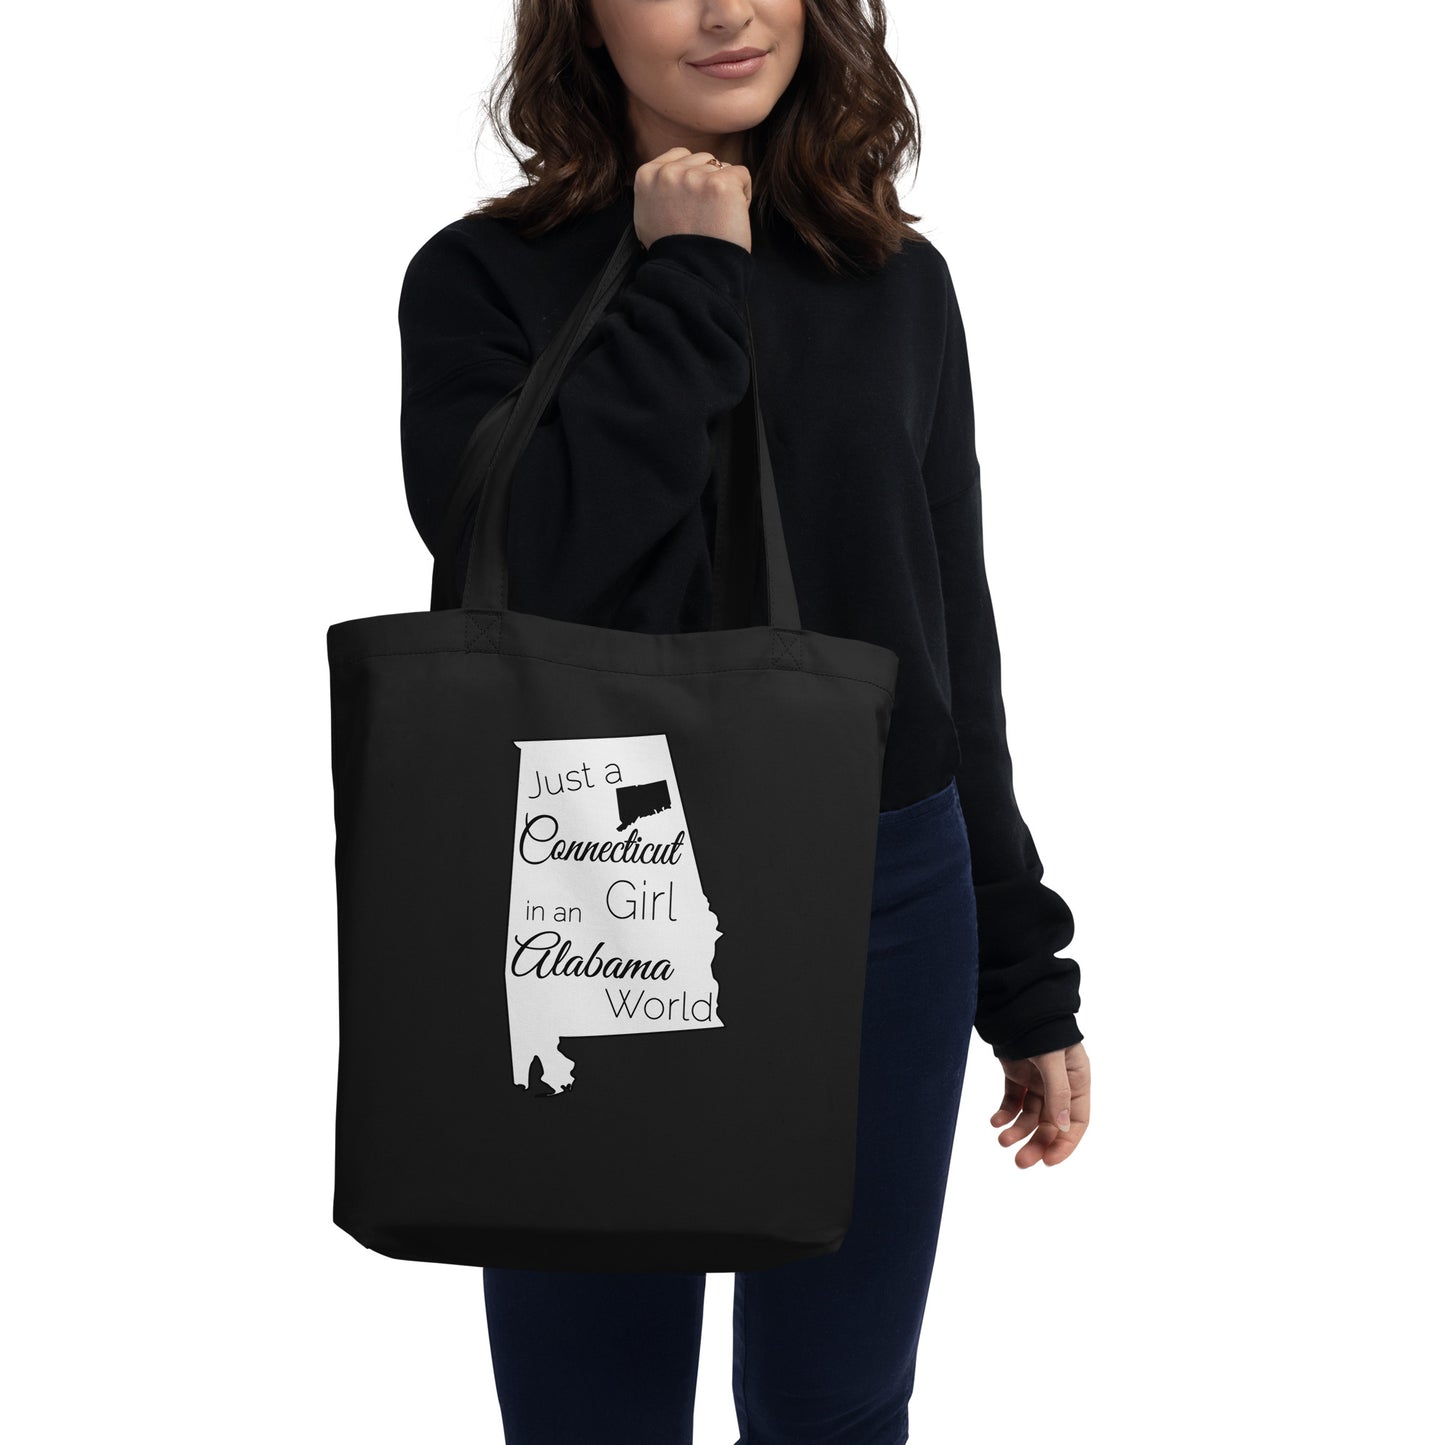 Just a Connecticut Girl in an Alabama World Eco Tote Bag